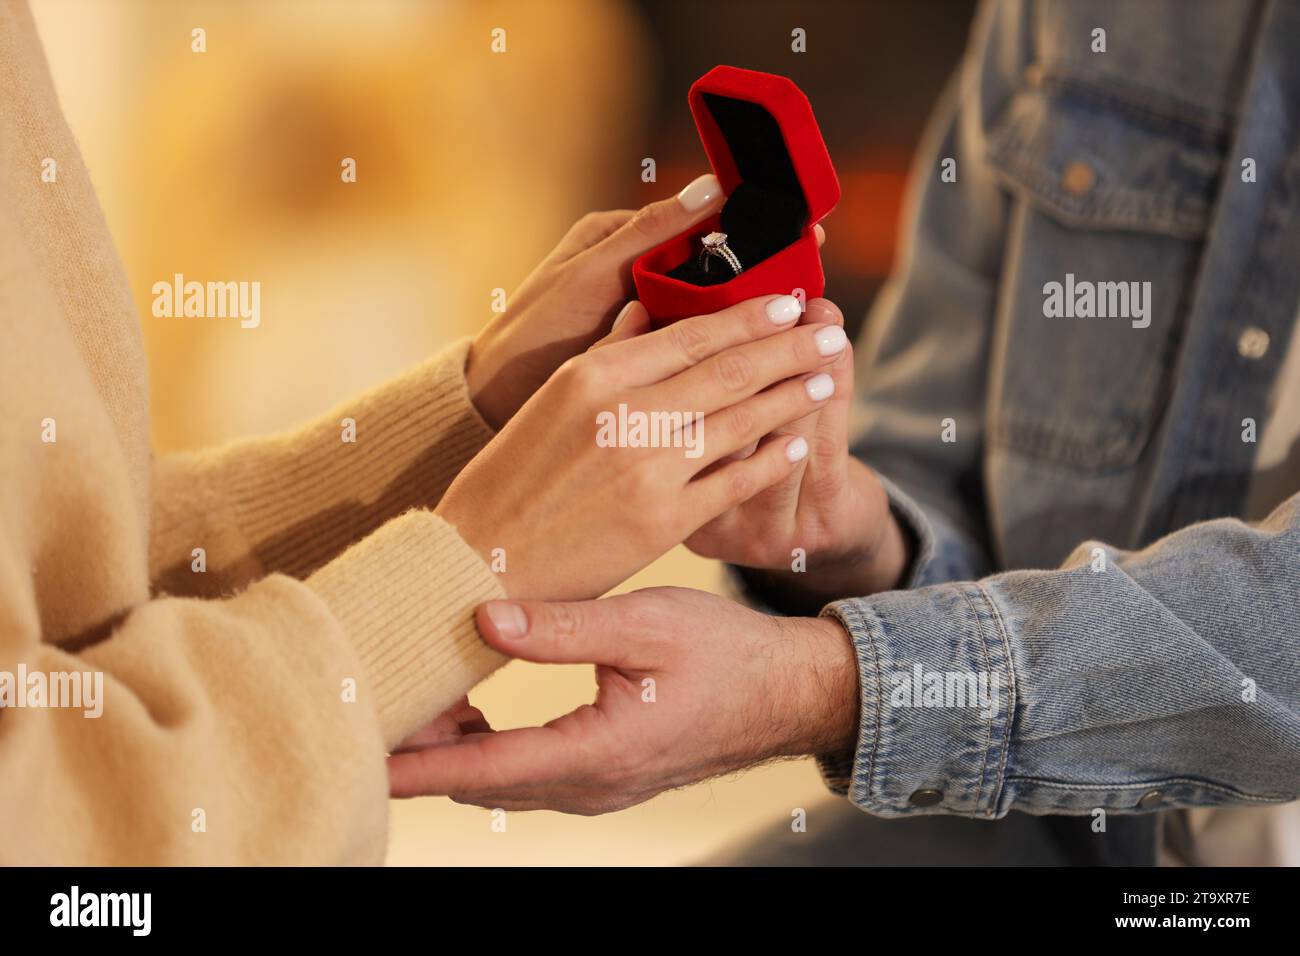 Man with engagement ring making proposal to his girlfriend against blurred background, closeup Stock Photo